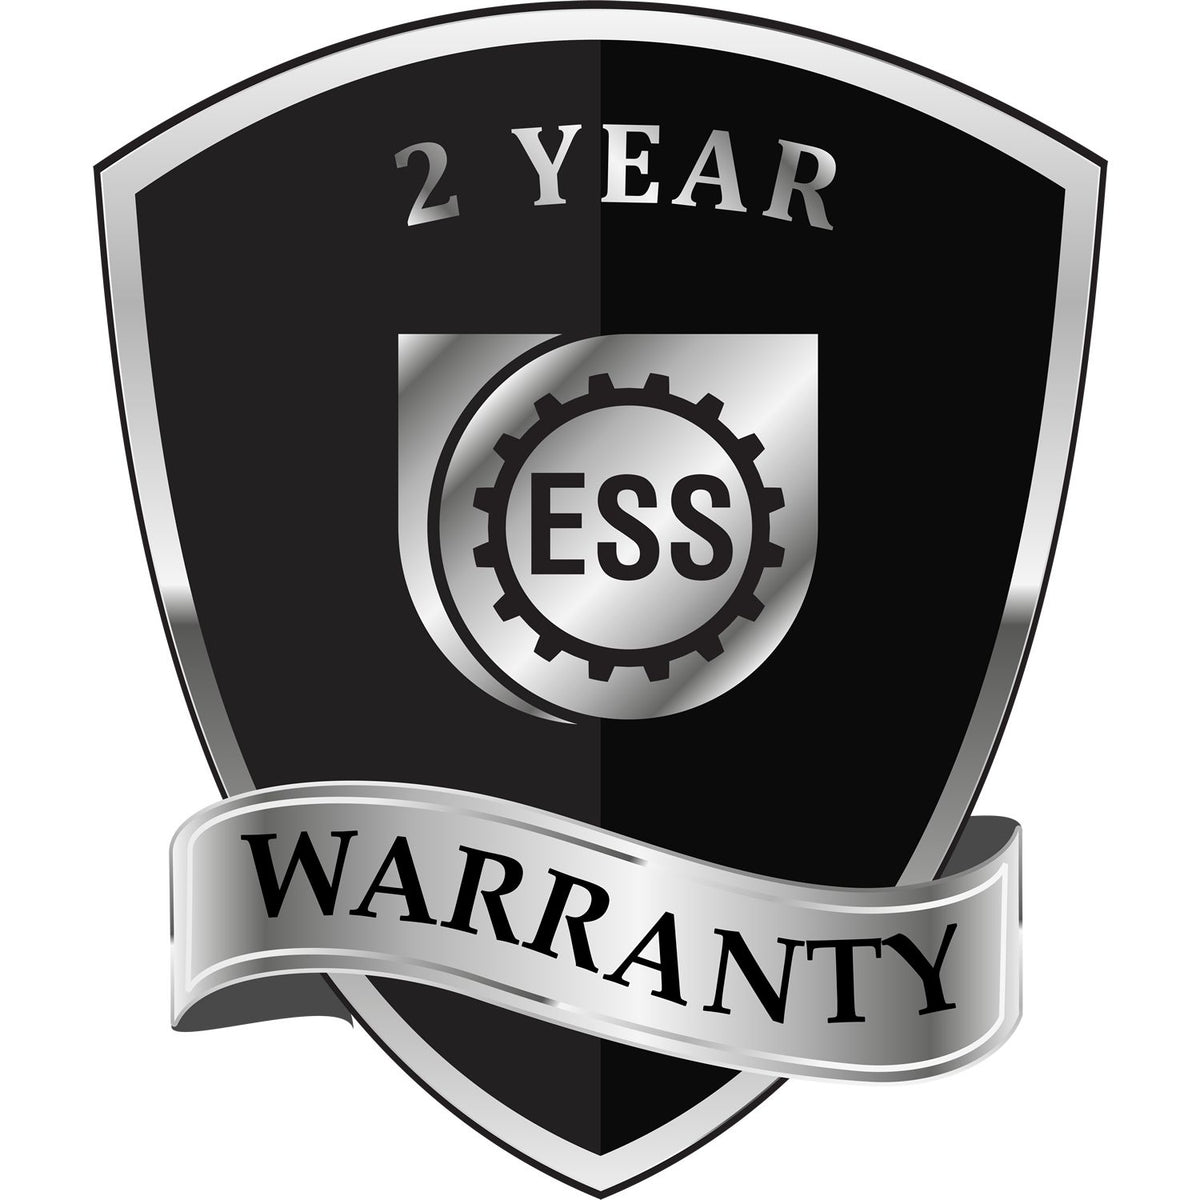 A black and silver badge or emblem showing warranty information for the Heavy Duty Cast Iron Maryland Geologist Seal Embosser